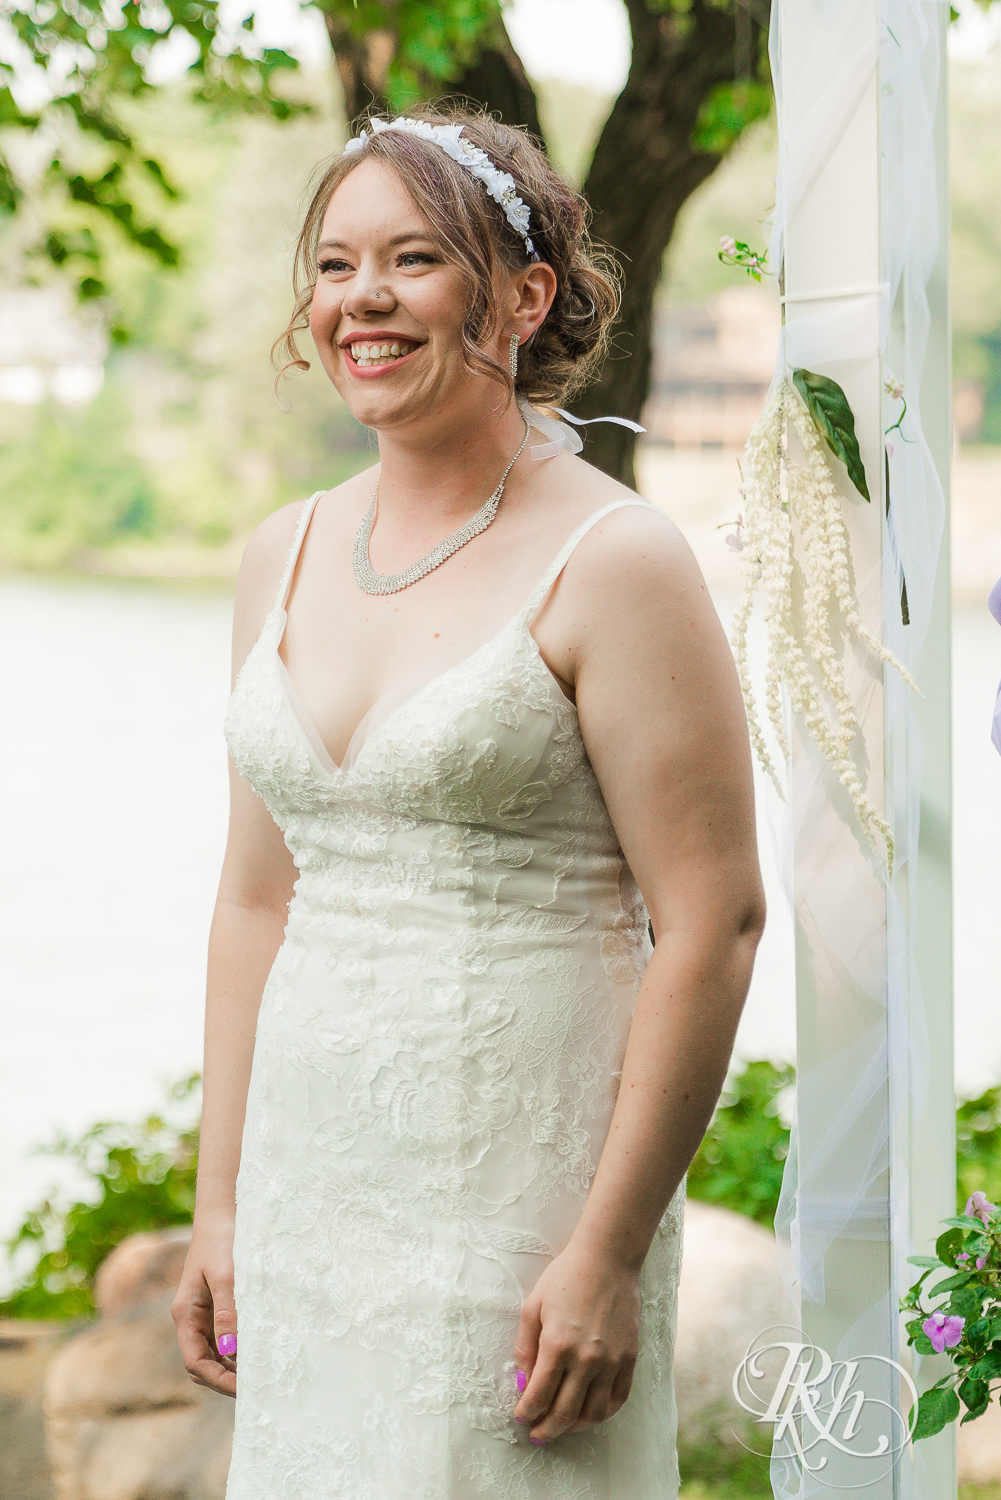 Lesbian bride smiling at her bride during outdoor wedding ceremony in Minnesota.